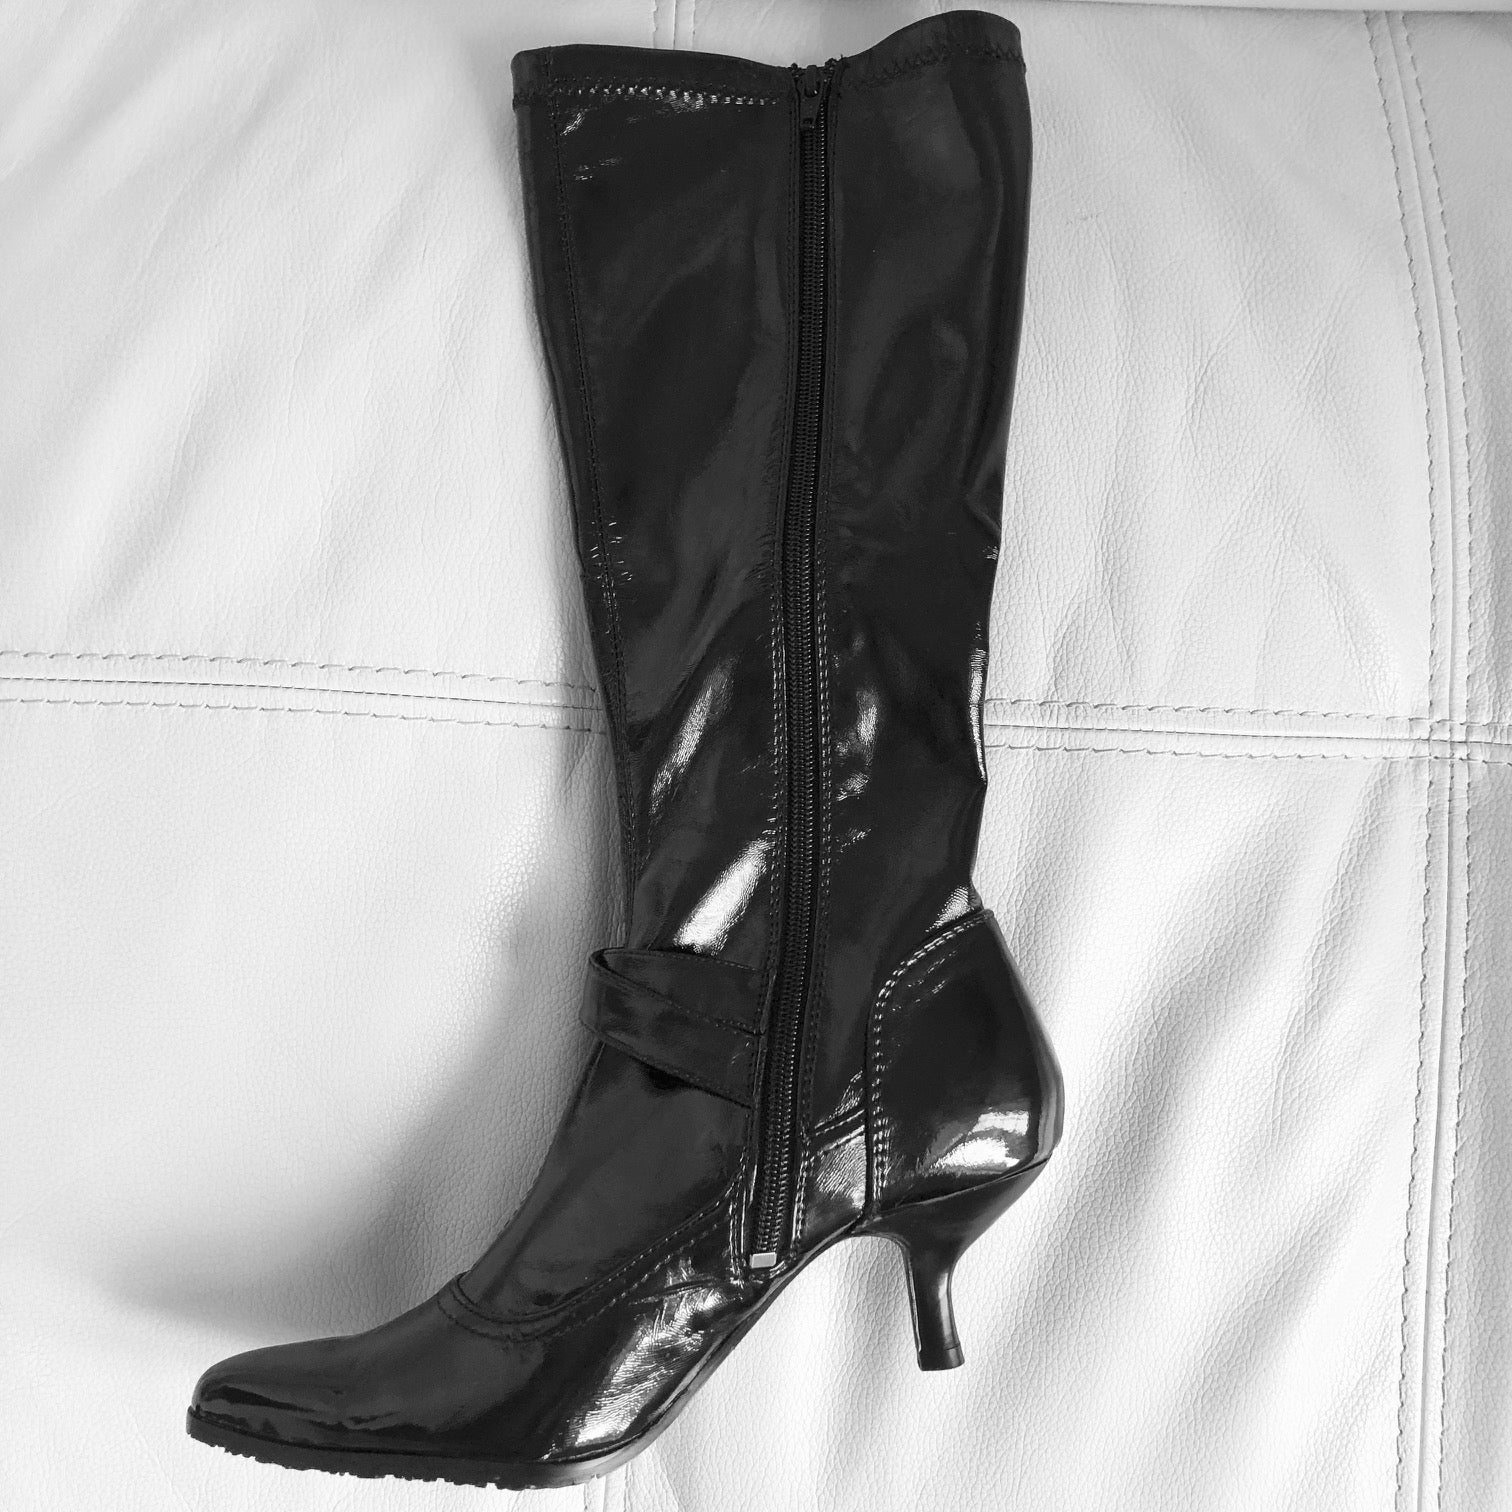 Square Toe Boots - Knee High Boots - Black Boots - Women's Boots - Lulus